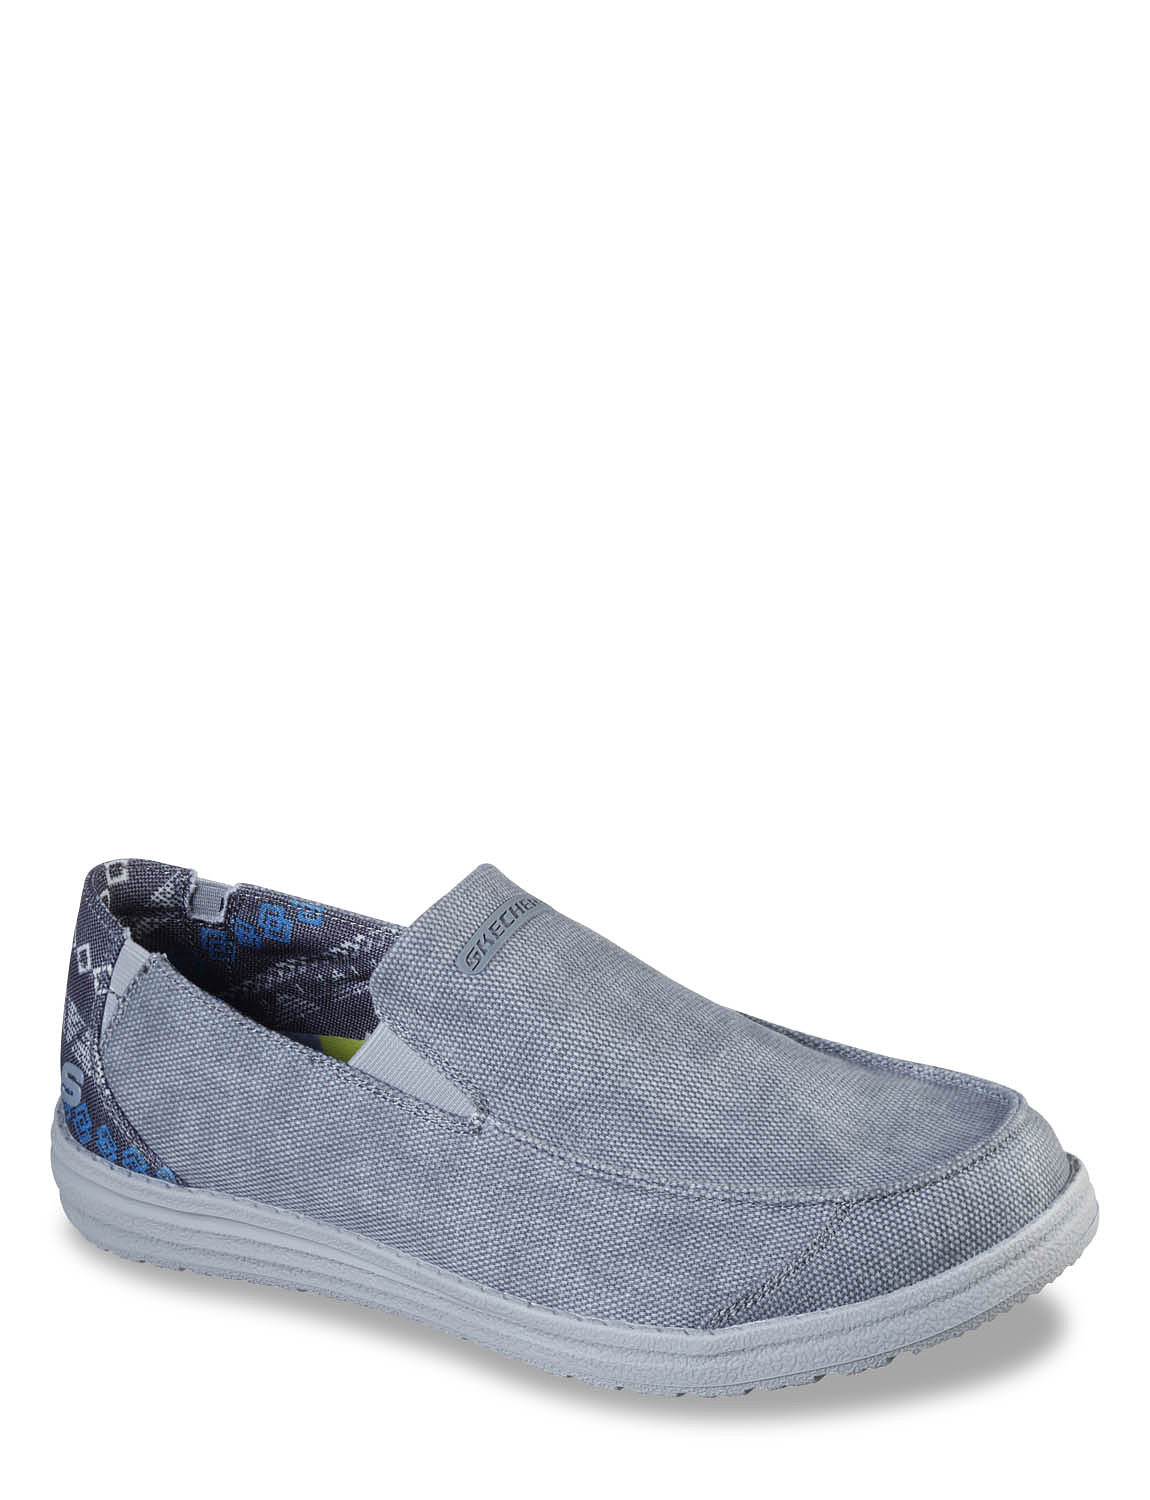 Skechers Wide Fit Canvas Slip On Melson Ralo | Chums